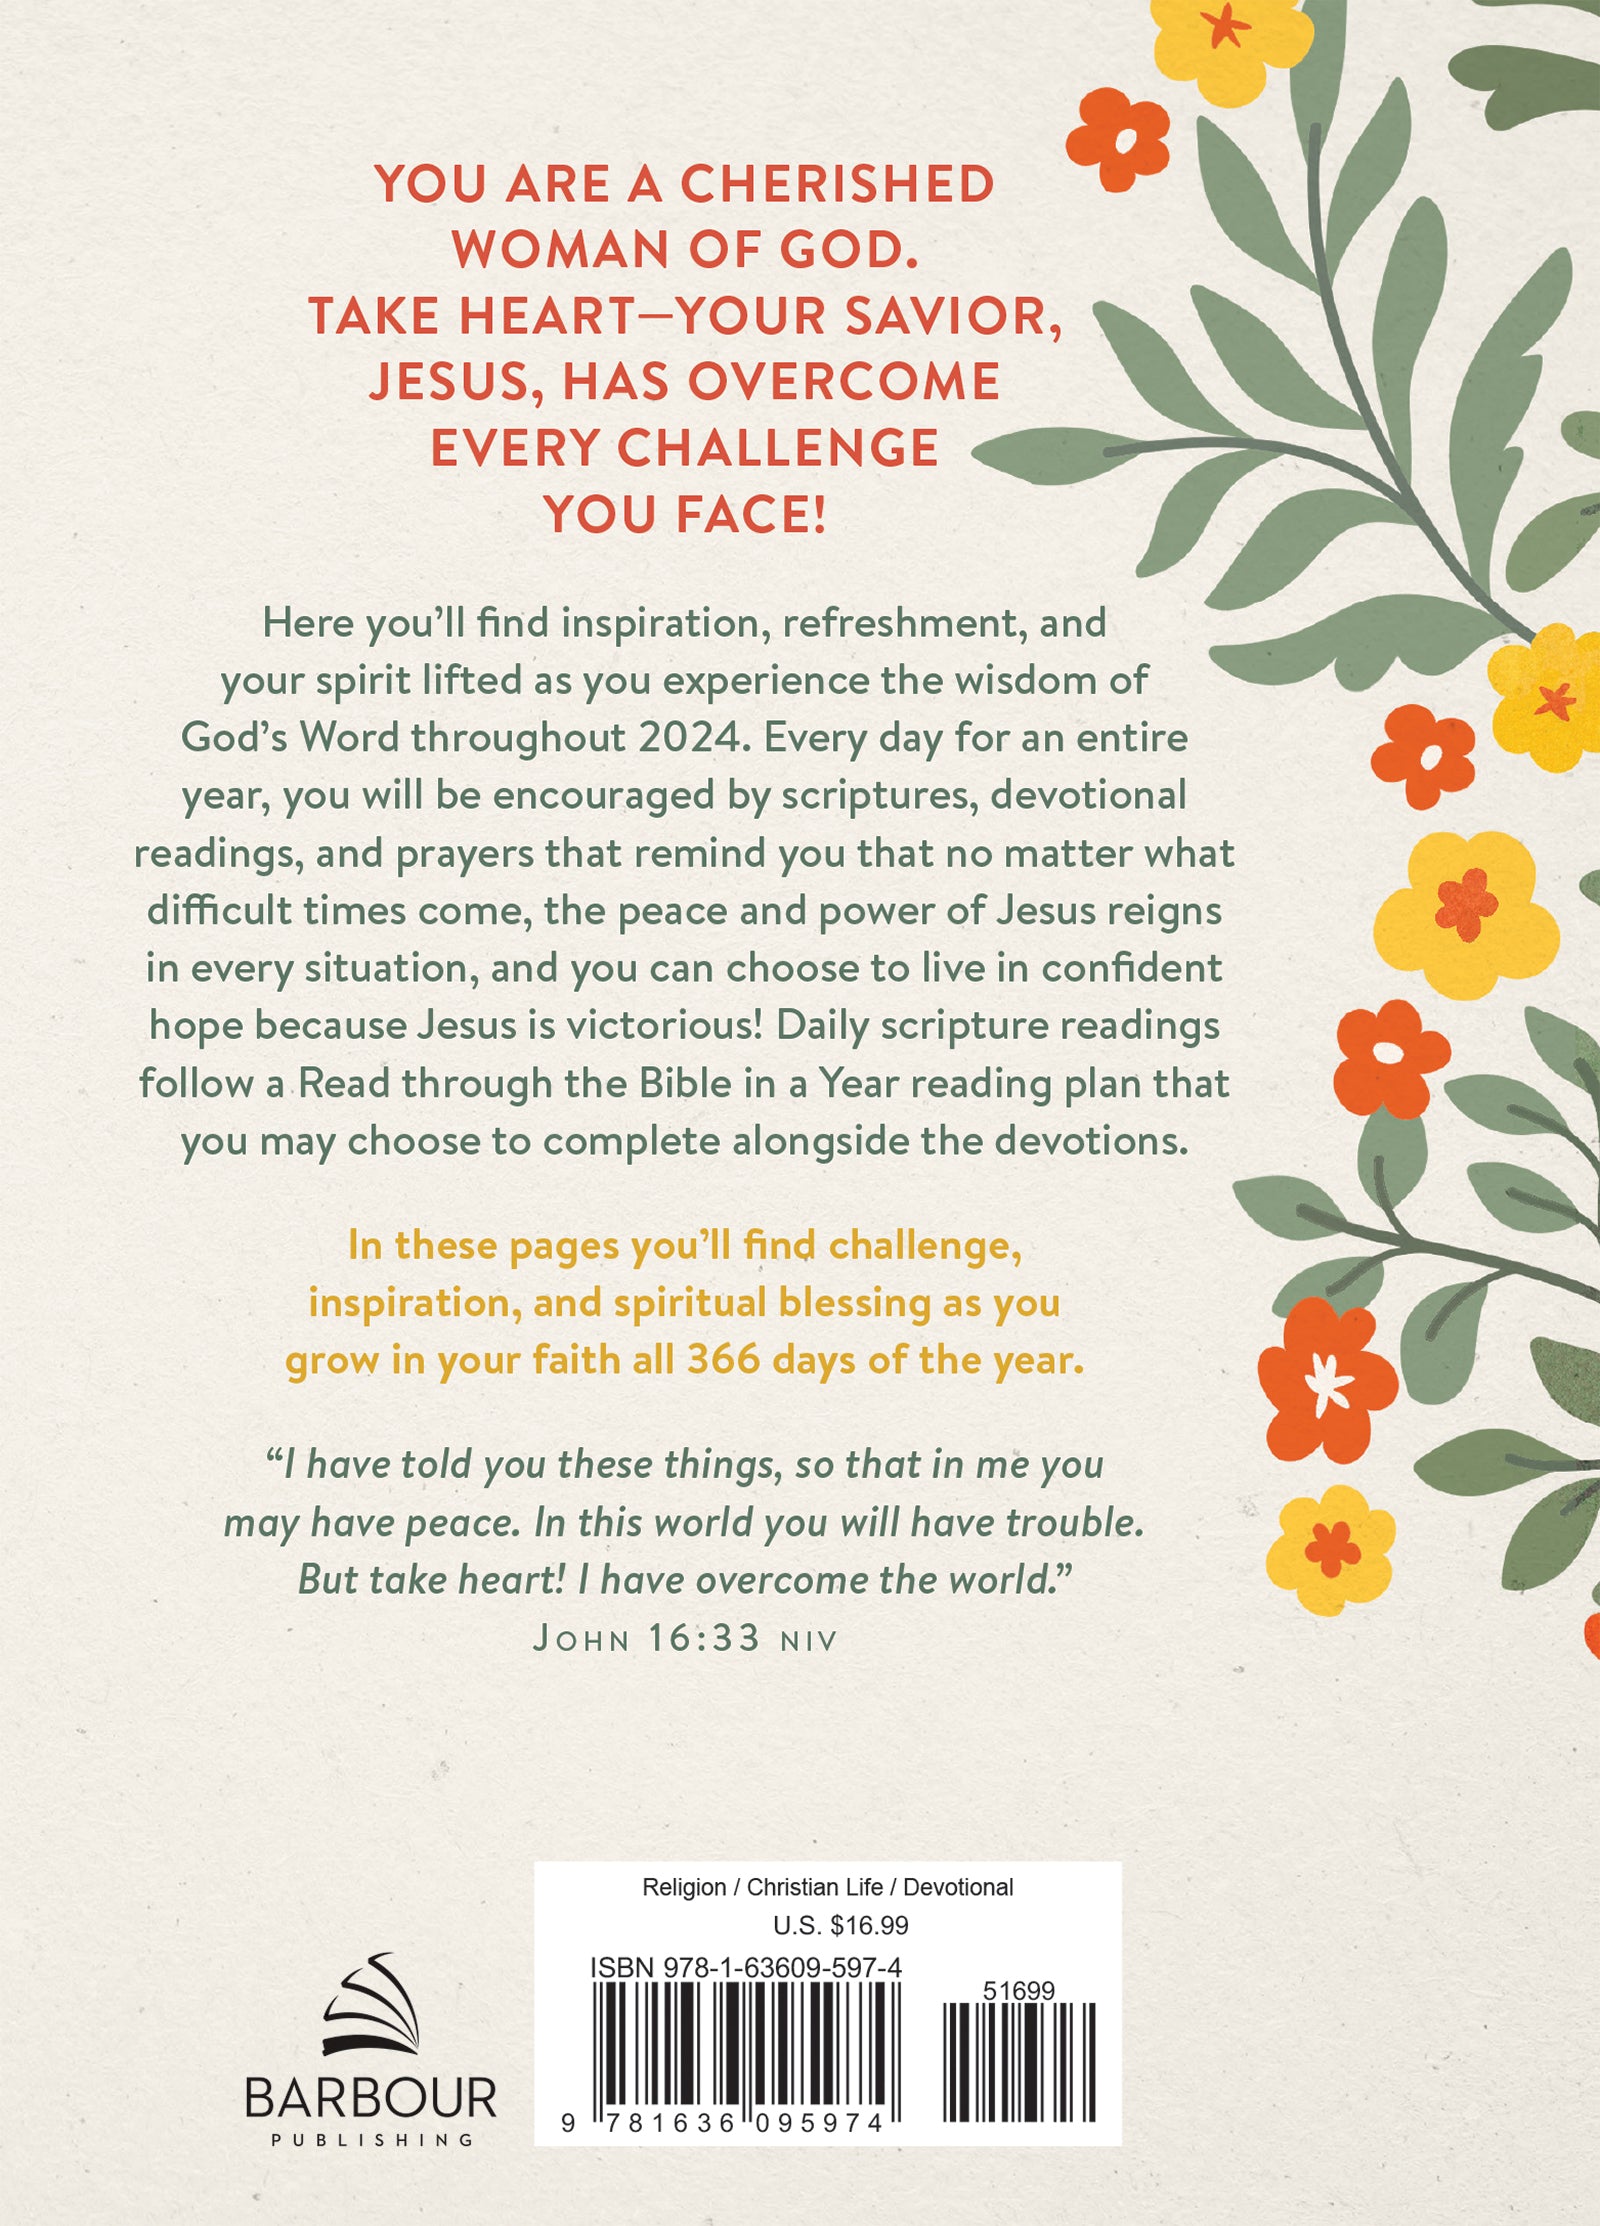 Daily Wisdom for Women 2024 Devotional Collection - The Christian Gift Company